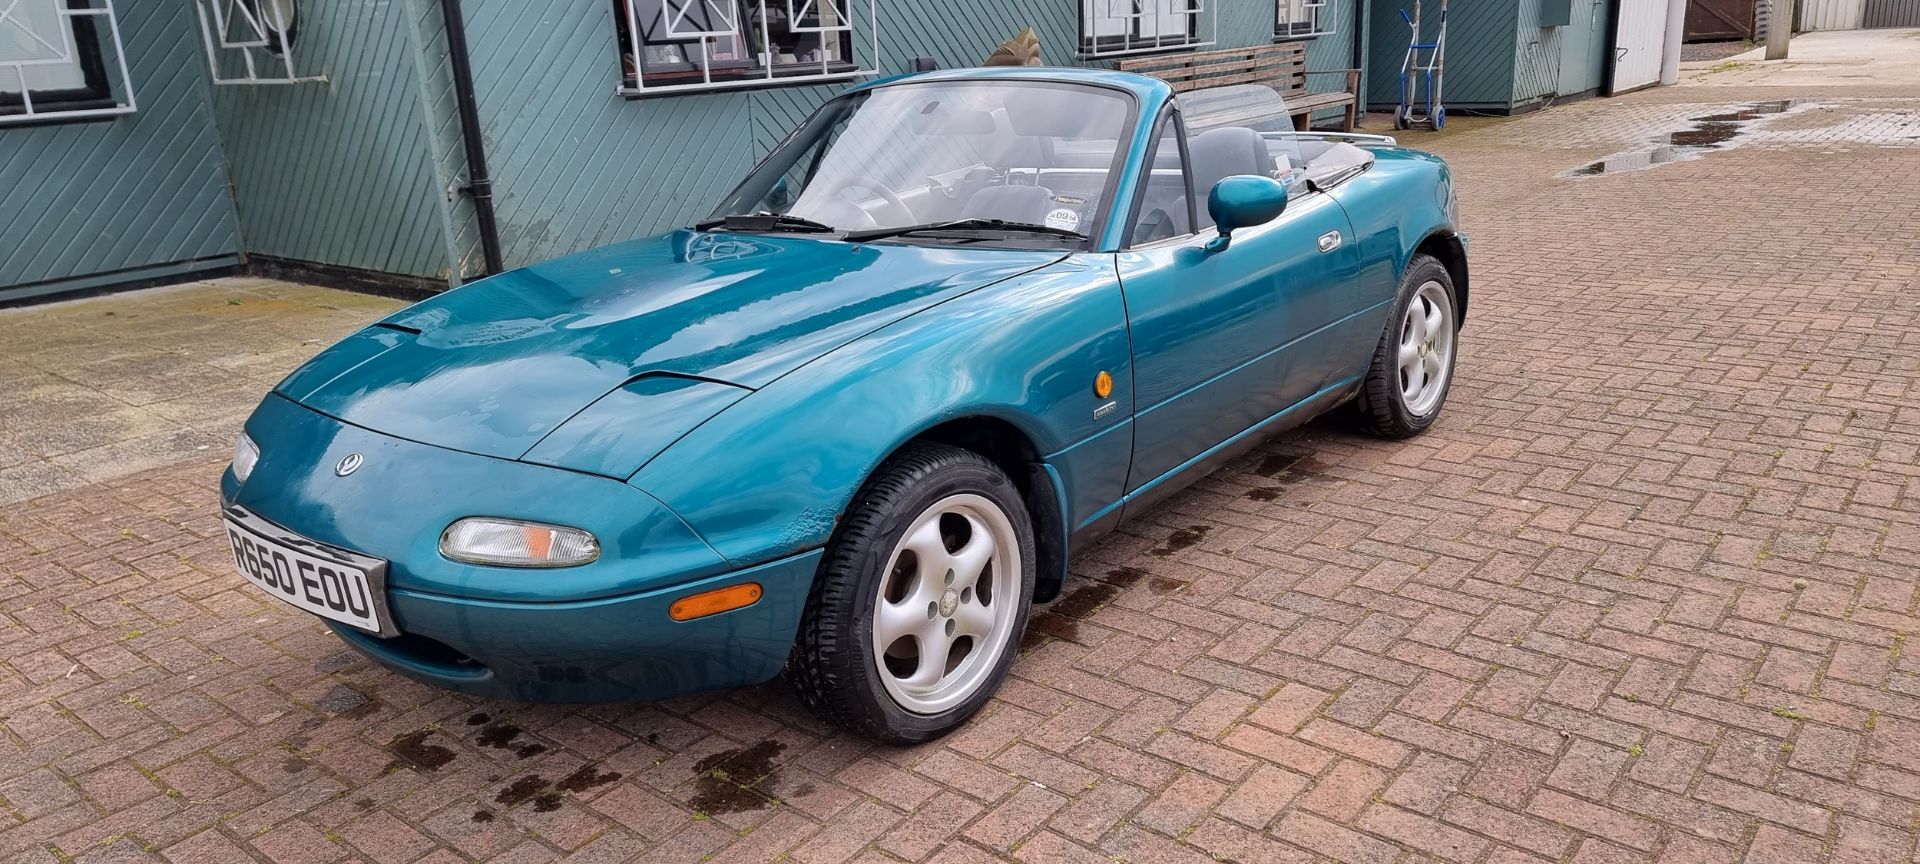 1998 Mazda MX5 Berkeley Limited Edition, 1840cc, project. Registration number R650 EOU. VIN number - Image 2 of 17